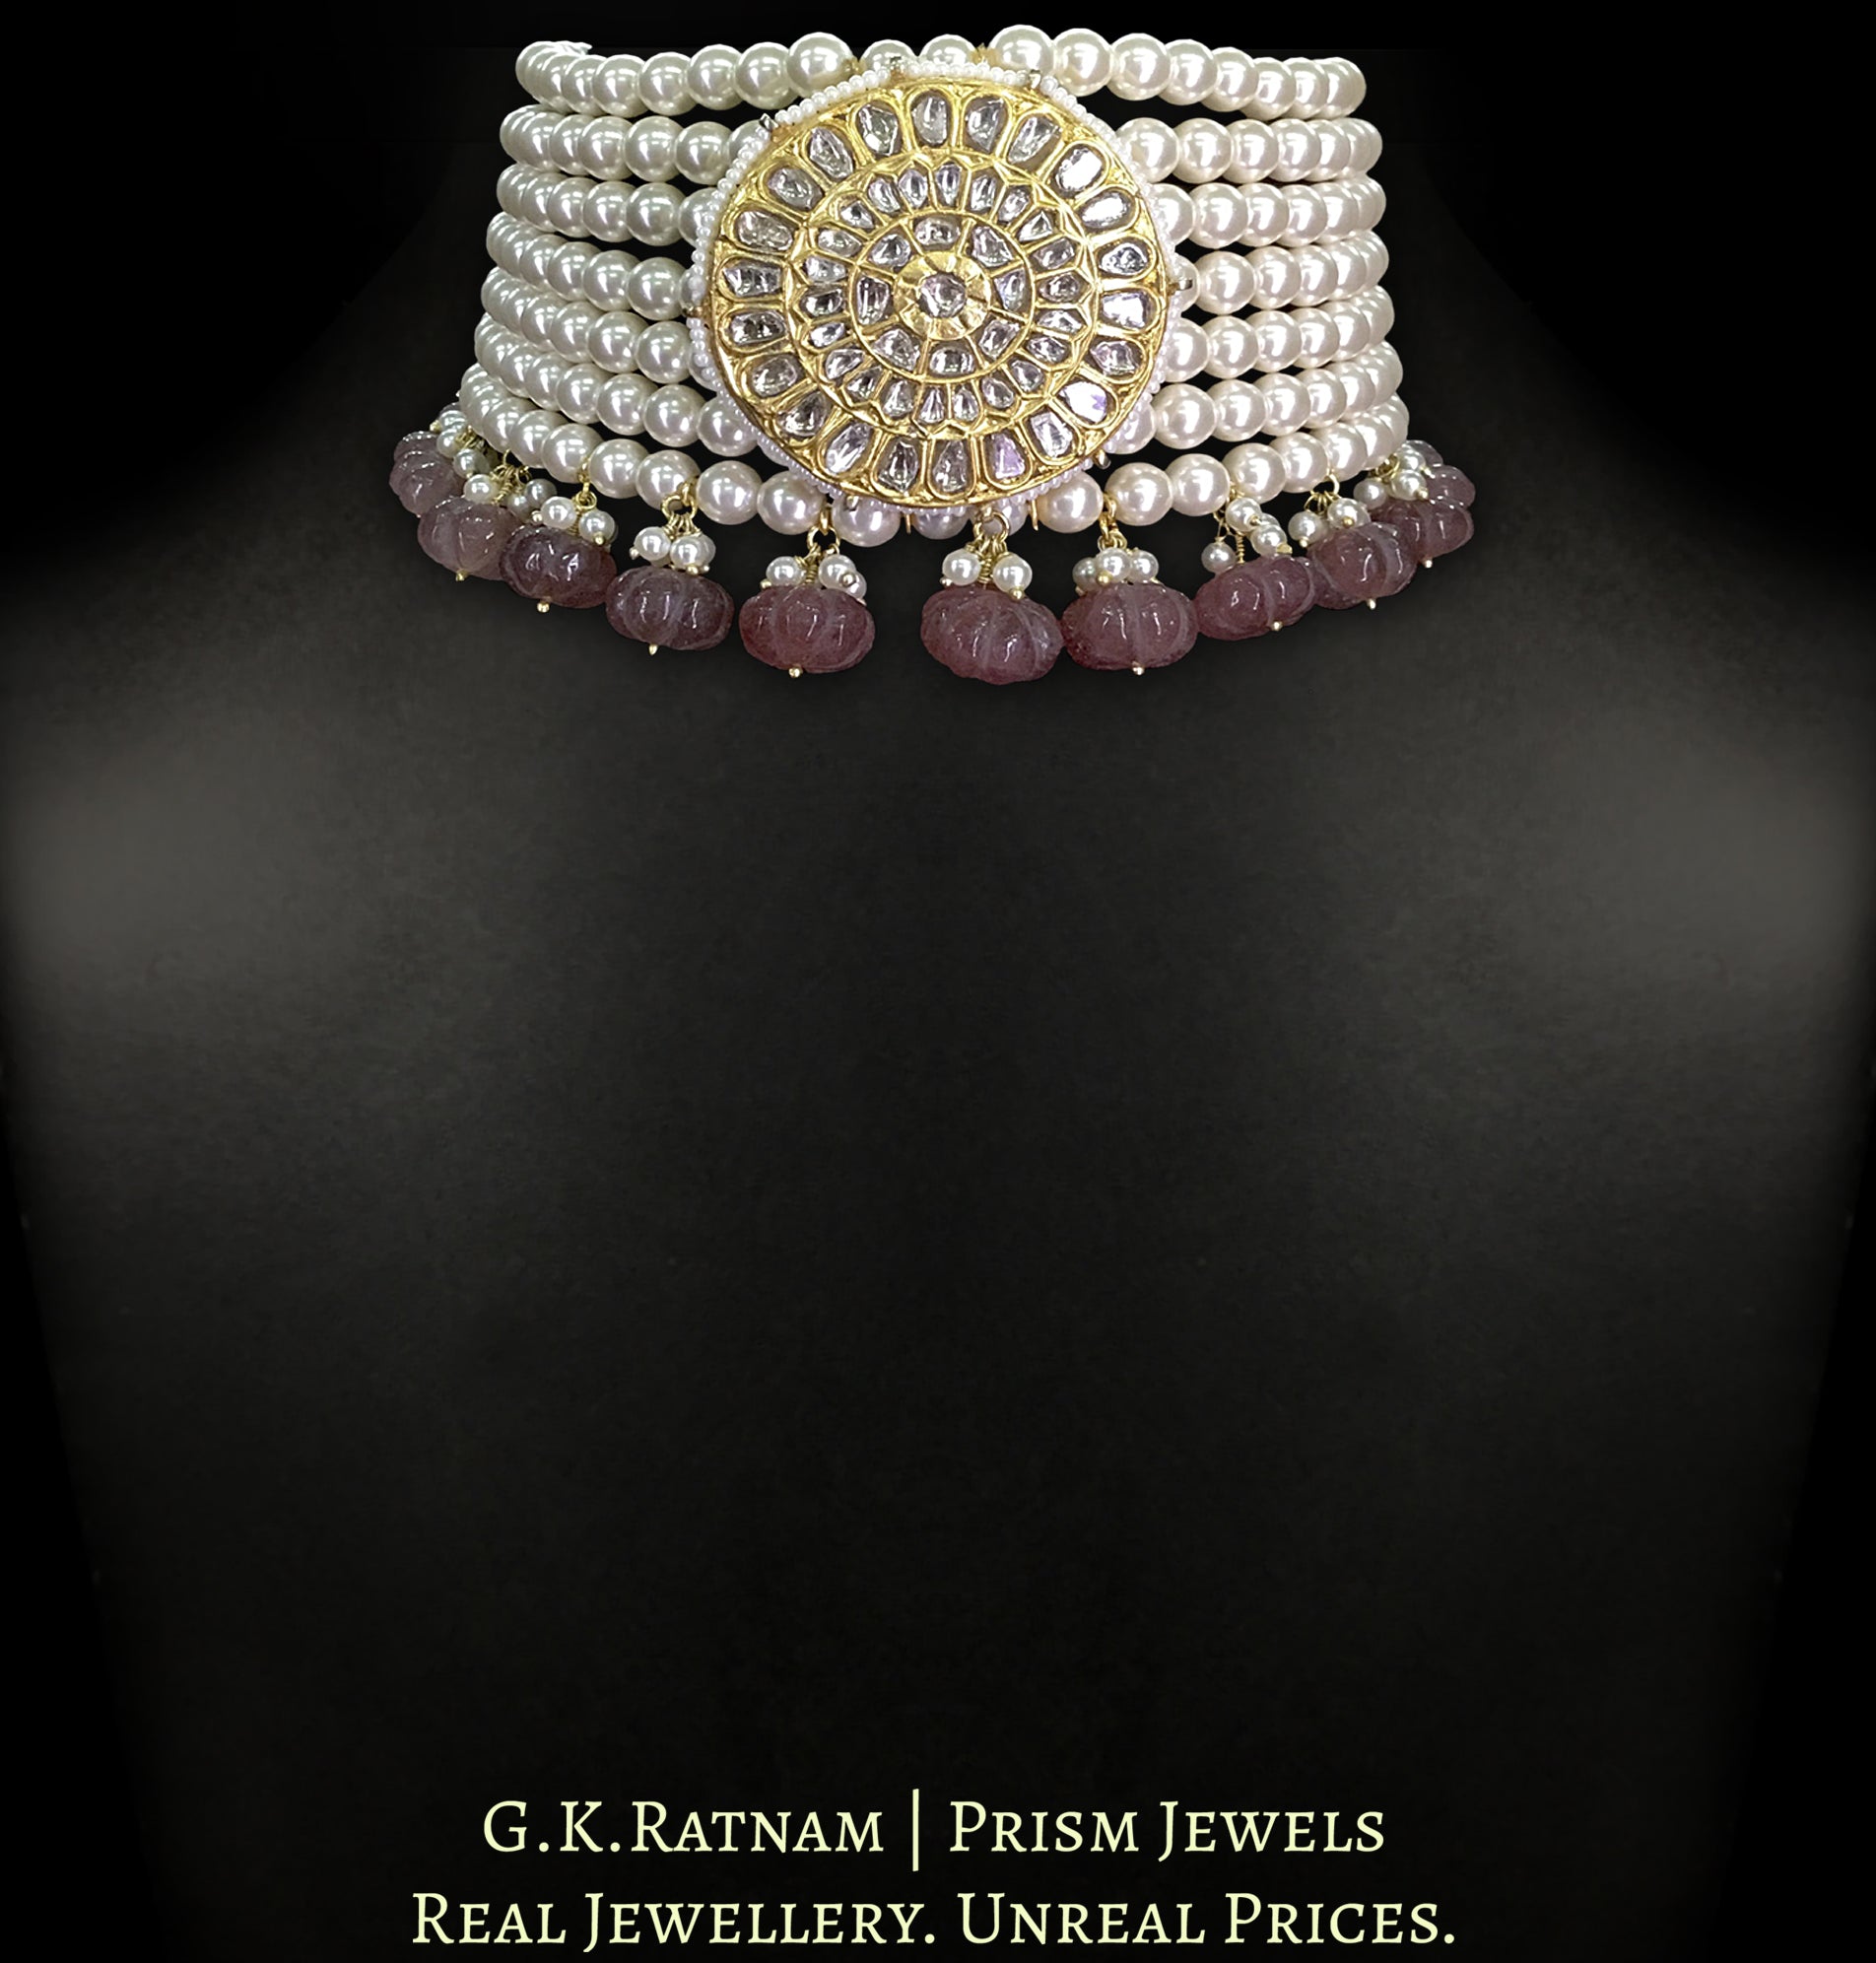 23k Gold and Diamond Polki Choker Necklace with Pearls and Pink Melons